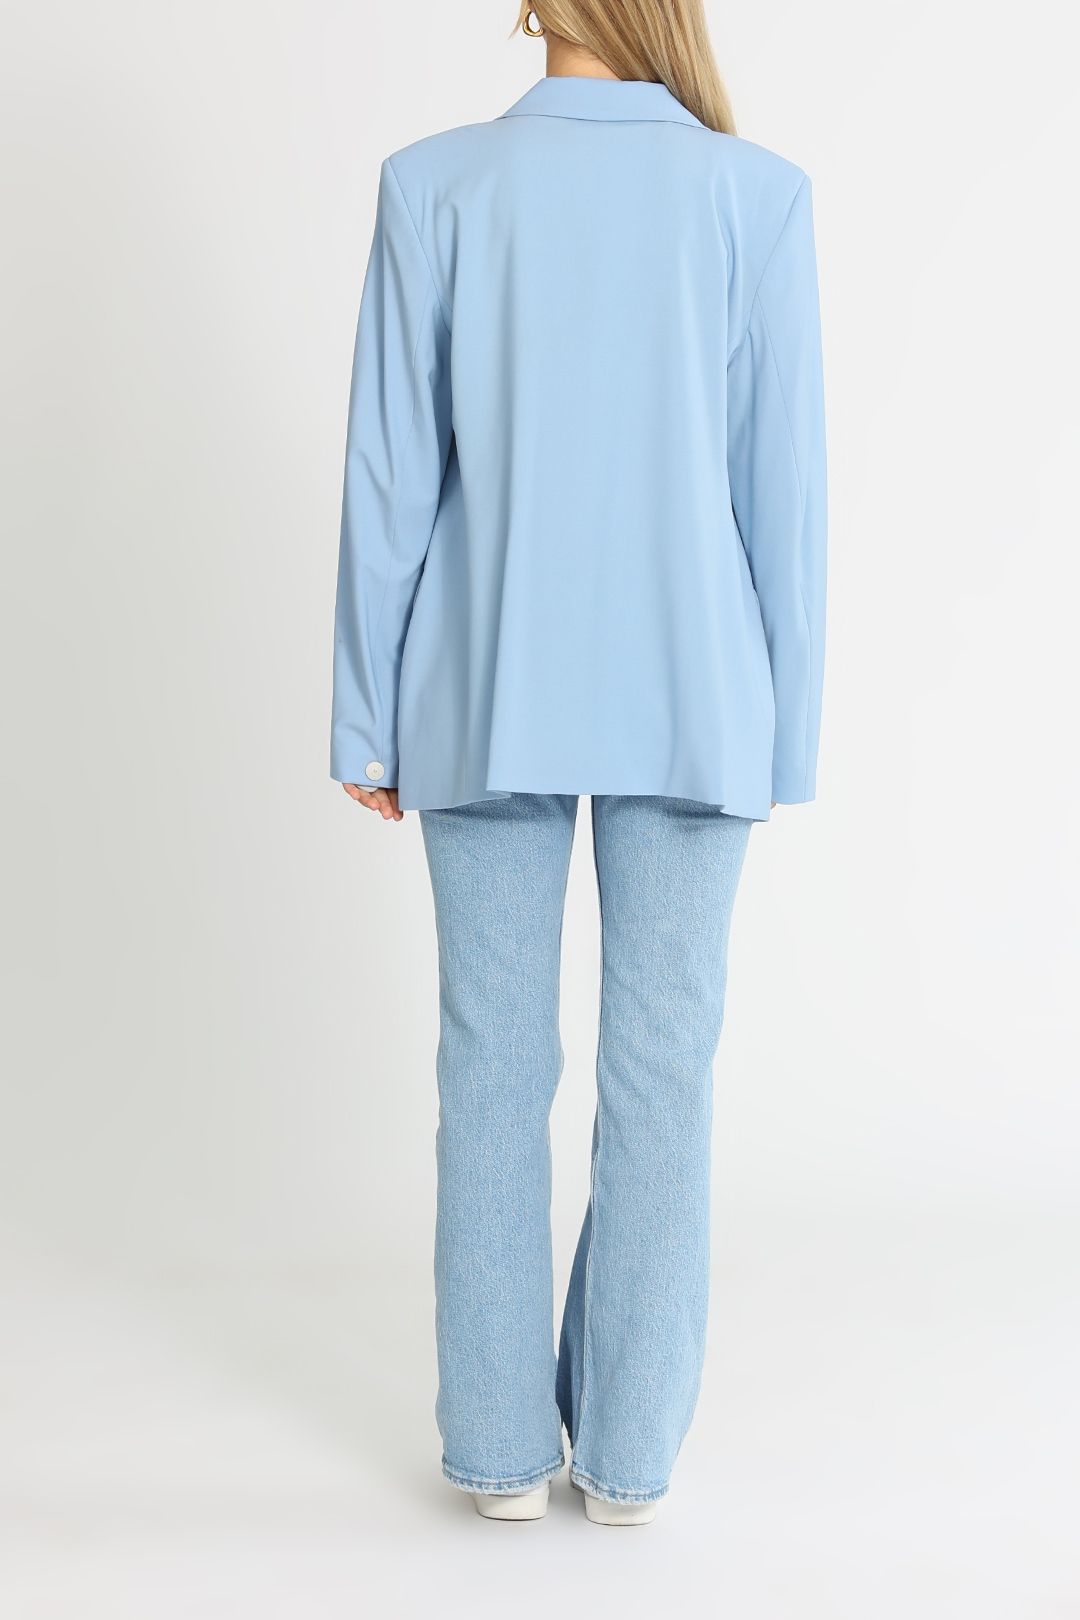 Arnsdorf Joan Jacket Blue Relaxed Fit